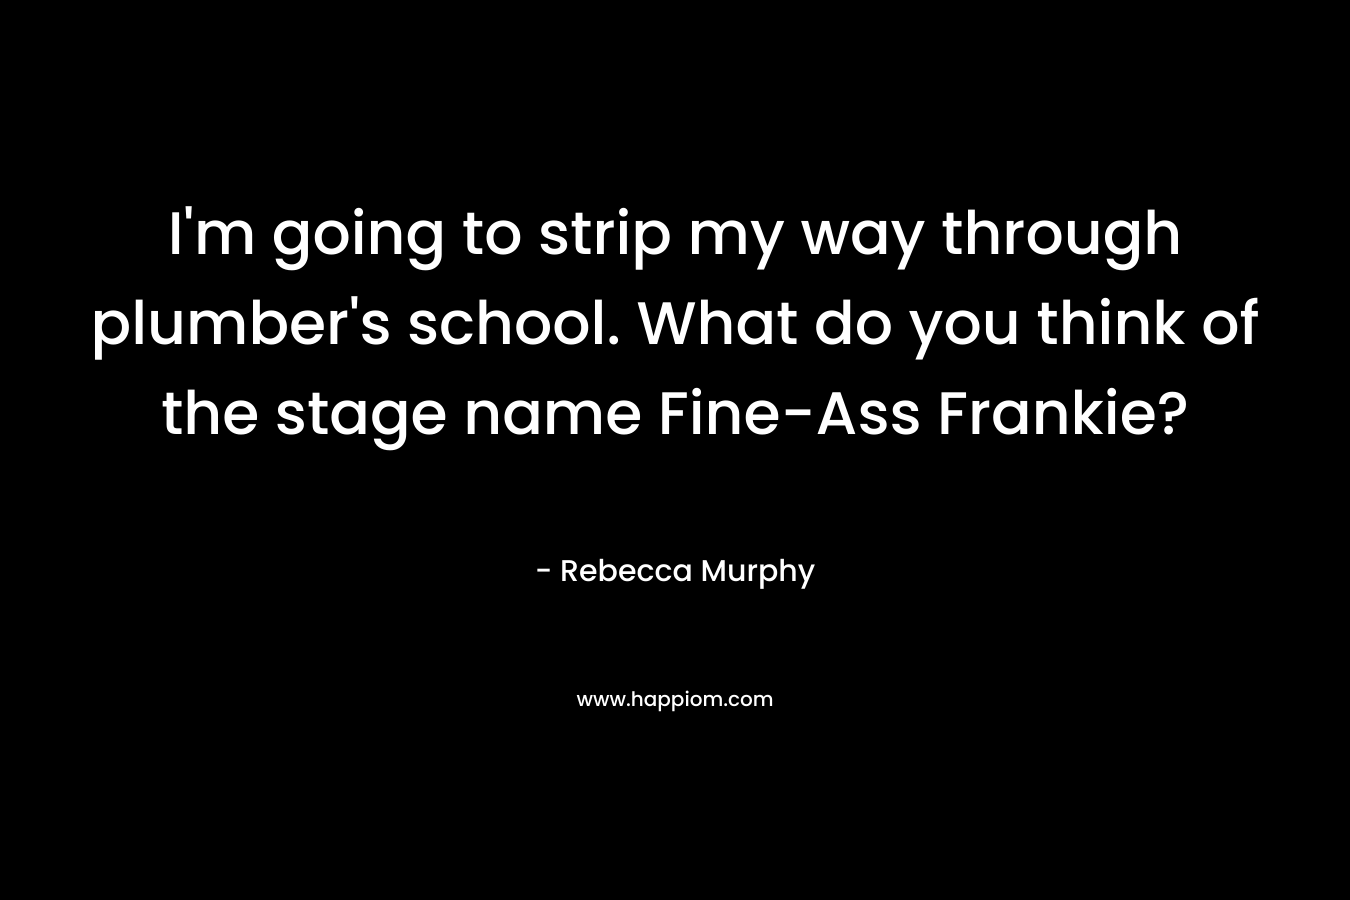 I’m going to strip my way through plumber’s school. What do you think of the stage name Fine-Ass Frankie? – Rebecca Murphy